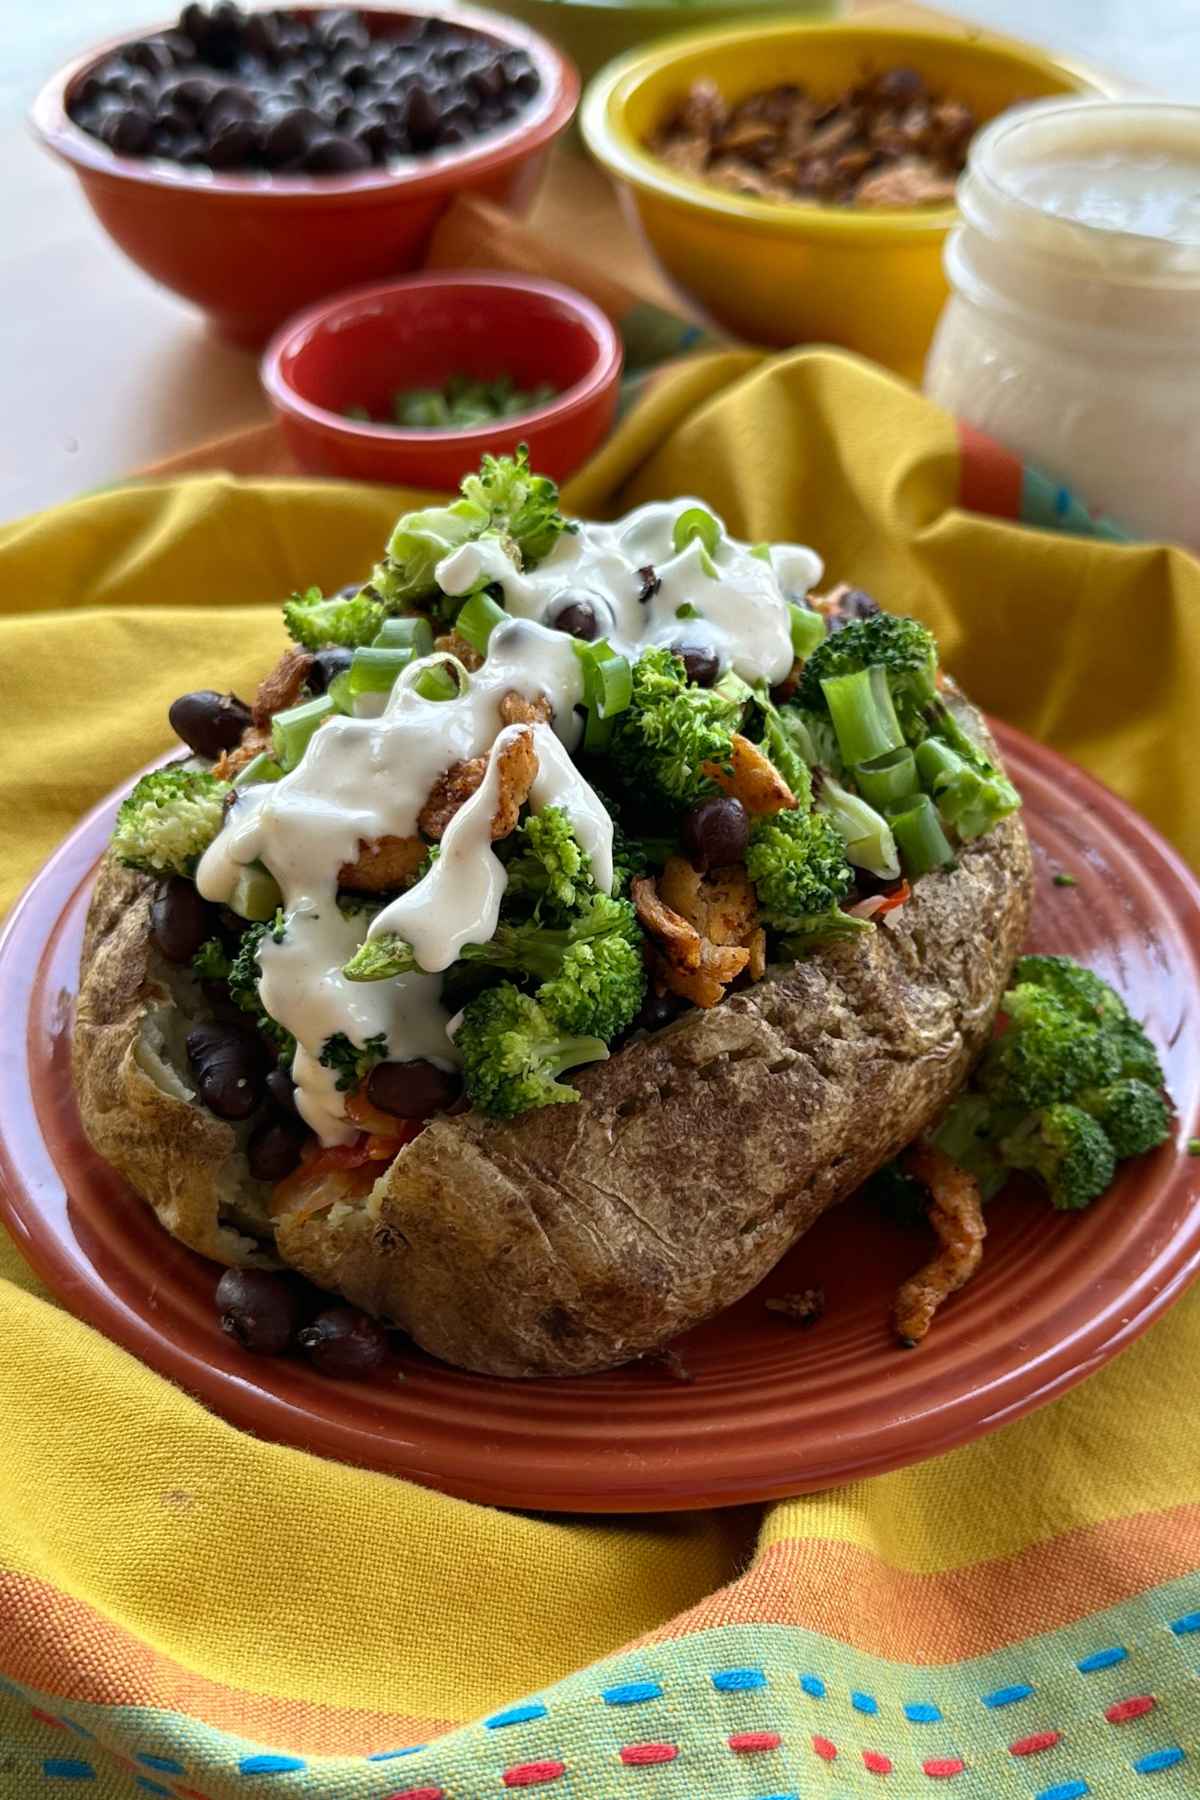 Stuffed baked potato with black beans, broccoli, soy curls, and green onions with aioli drizzled on top. On red plate on top of yellow, orange, and green cloth napkin with blue and red stitching. Ingredients in background in serving dishes.